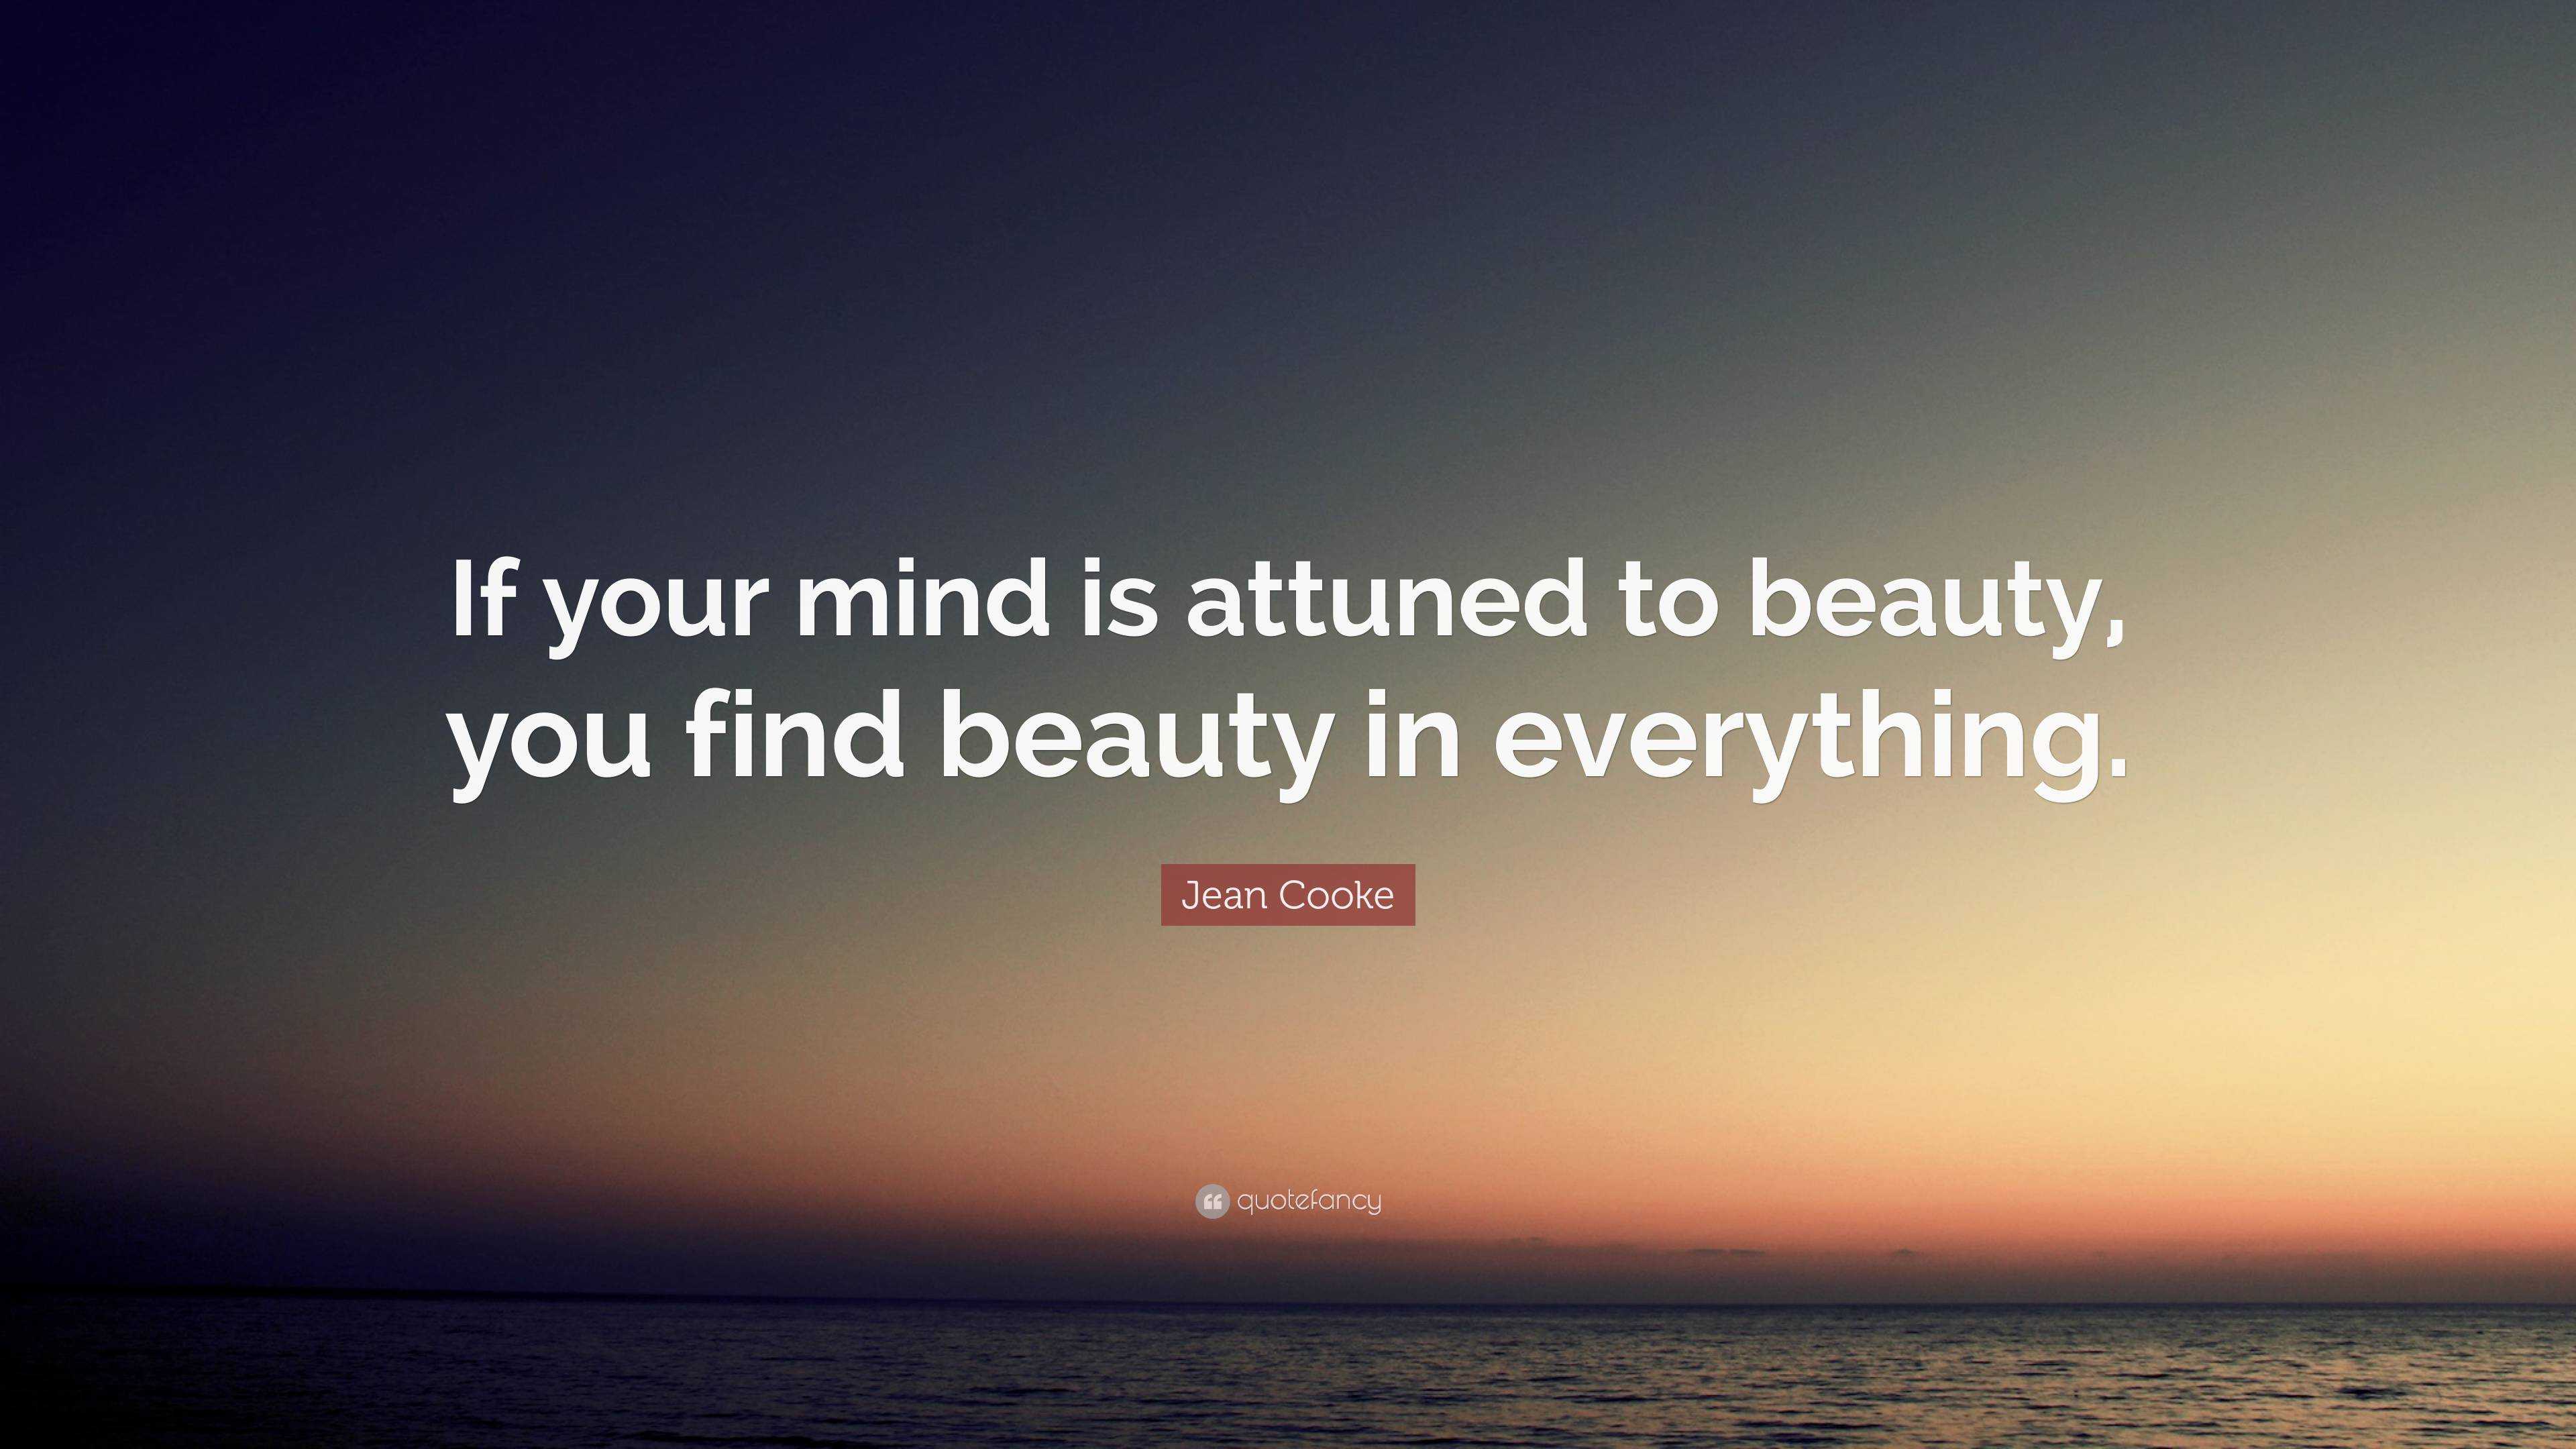 Jean Cooke Quote “if Your Mind Is Attuned To Beauty You Find Beauty